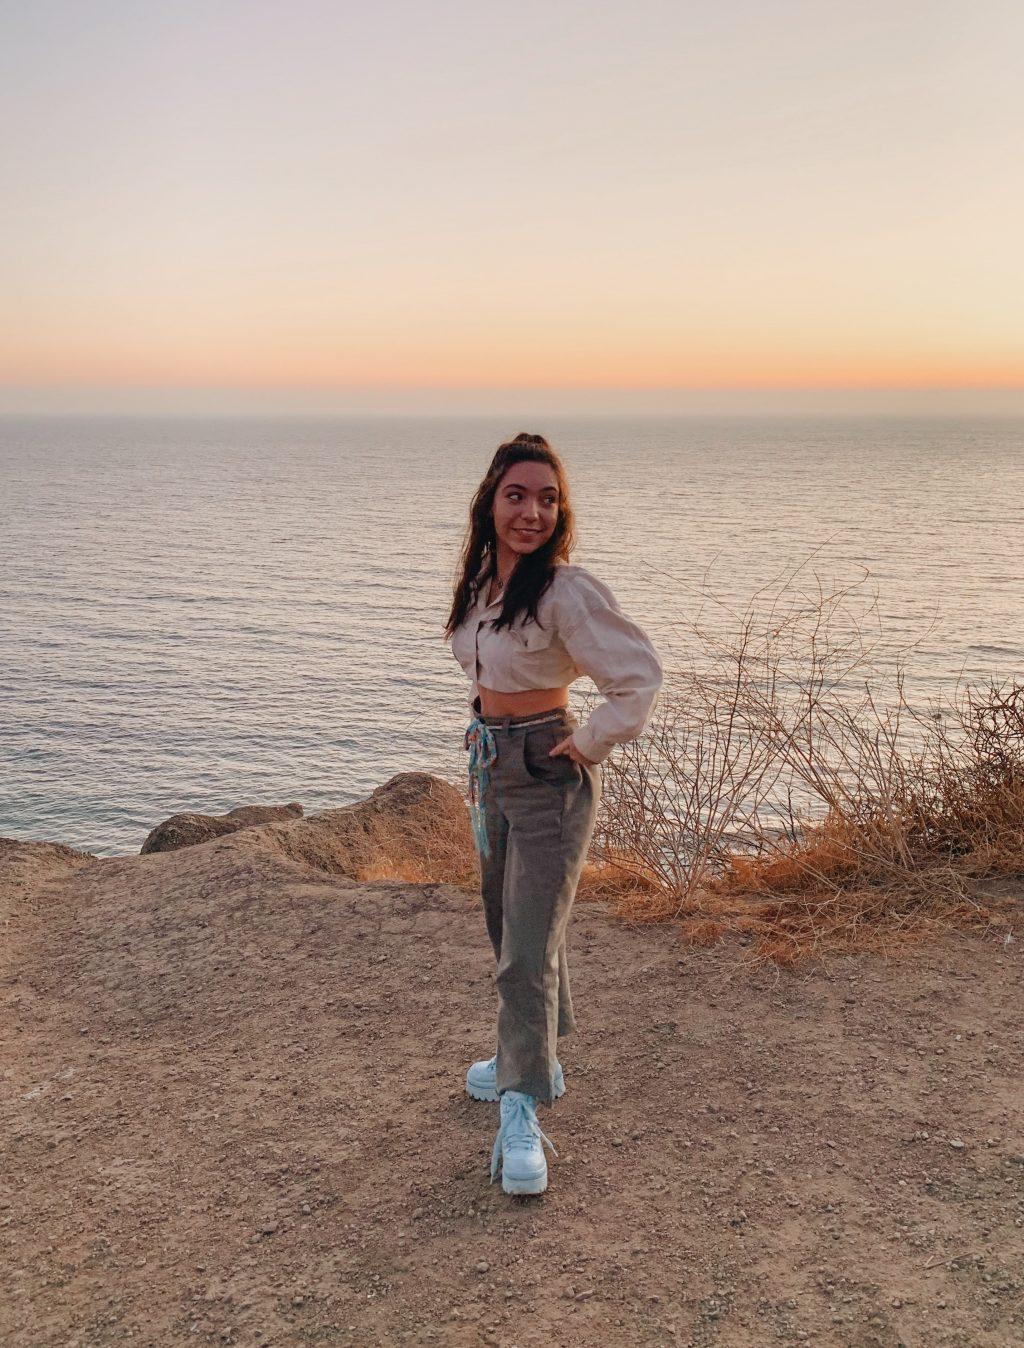 First-year Chloe McLeod poses at the beach during sunset. McLeod said a reason she chose Pepperdine was its proximity to the ocean. Photo courtesy of Chloe McLeod